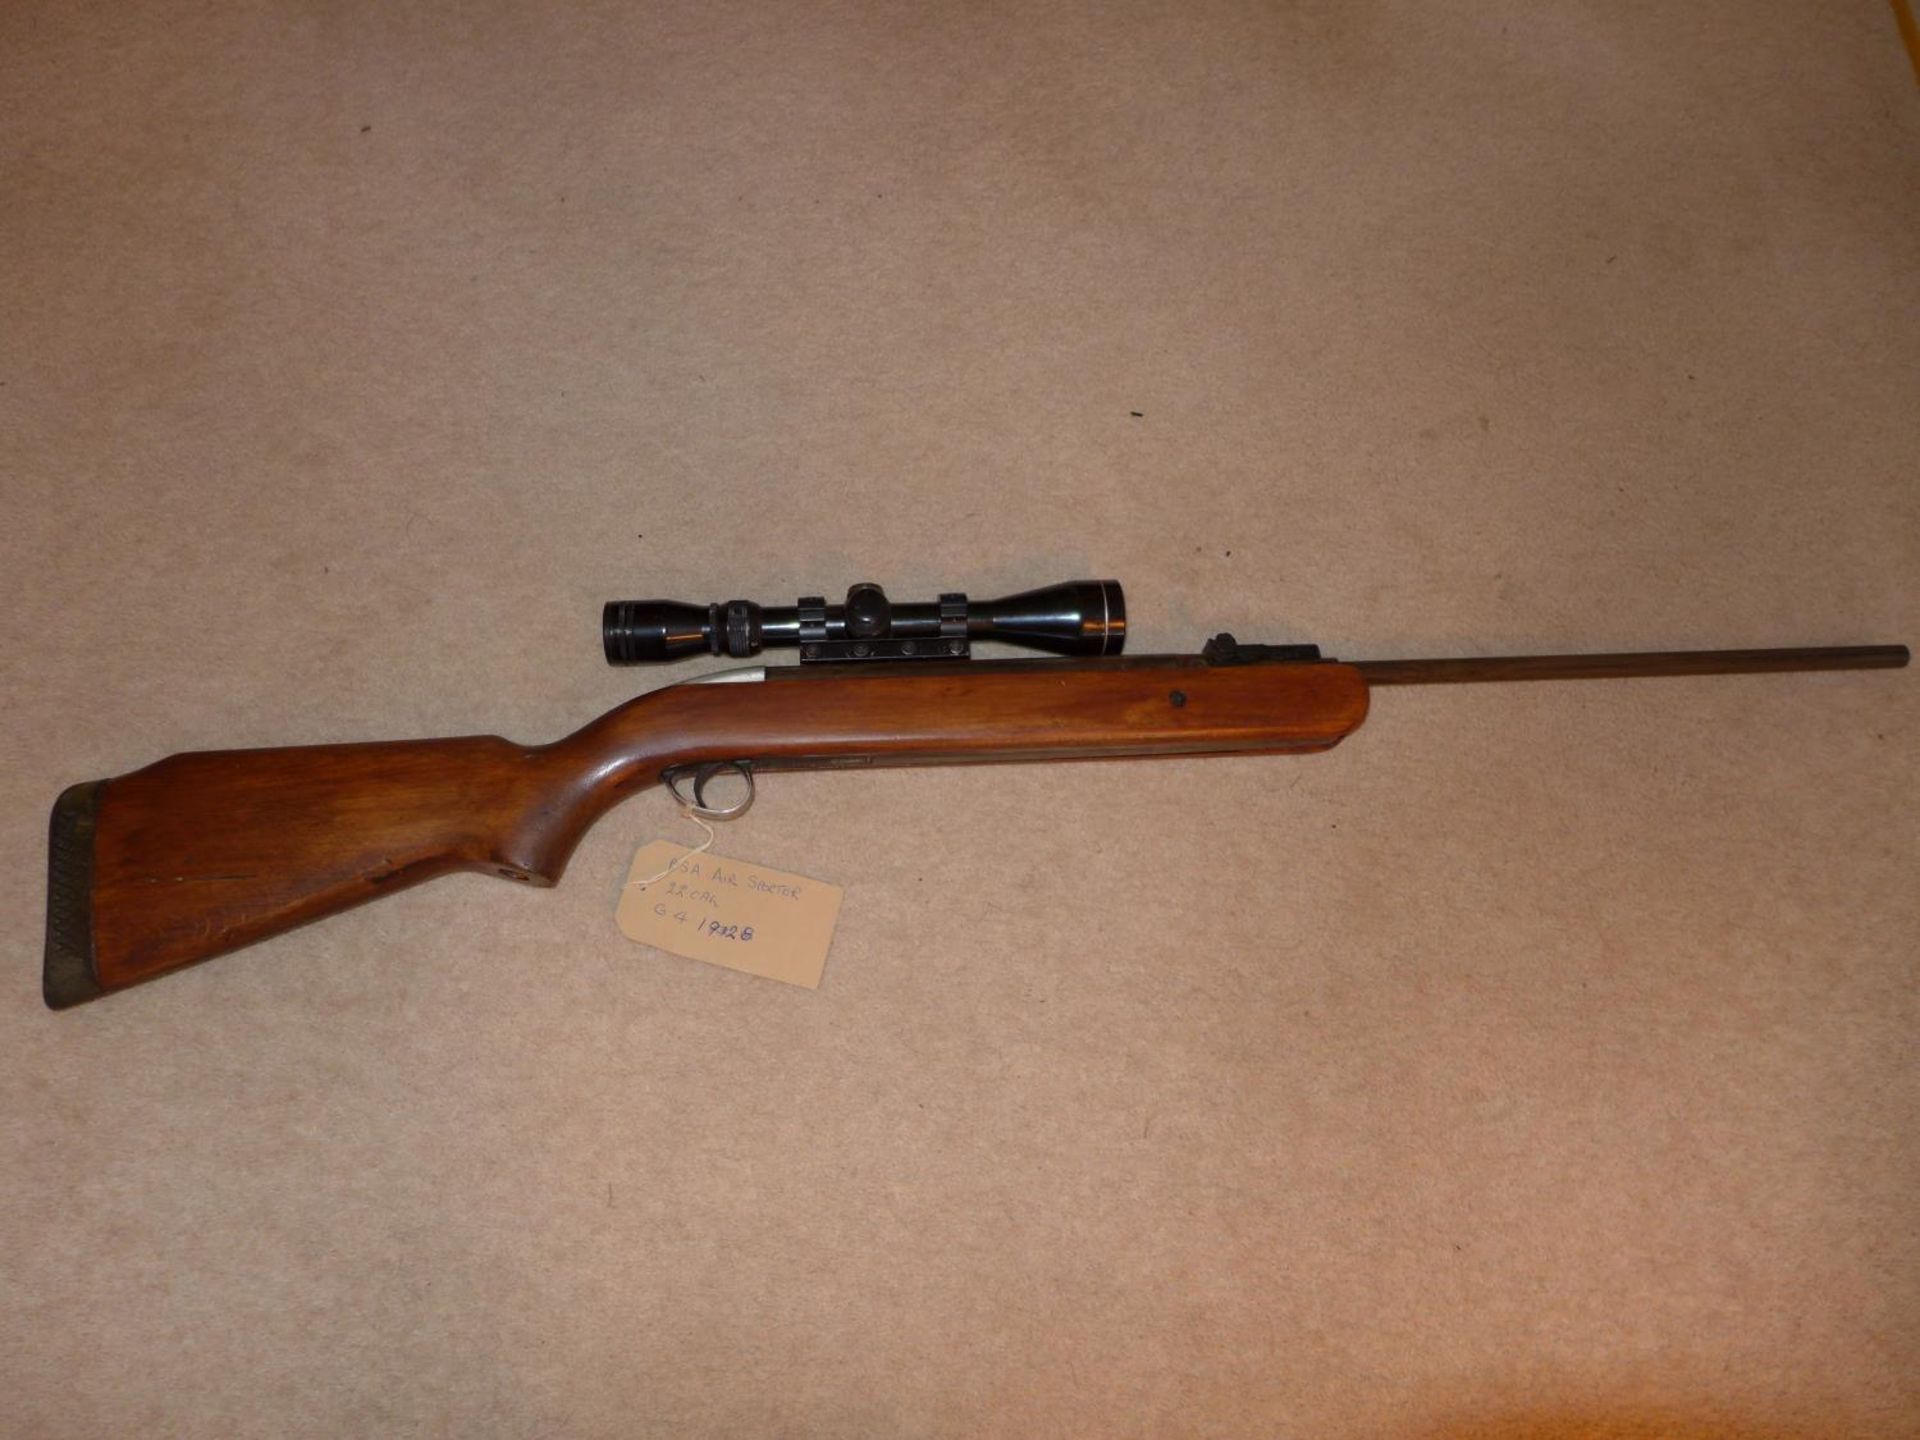 A B.S.A. .22 CALIBRE AIR SPORTER AIR RIFLE, 46CM BARREL, FITTED TASCO PRONGHORN TELESCOPIC SIGHTS - Image 2 of 4